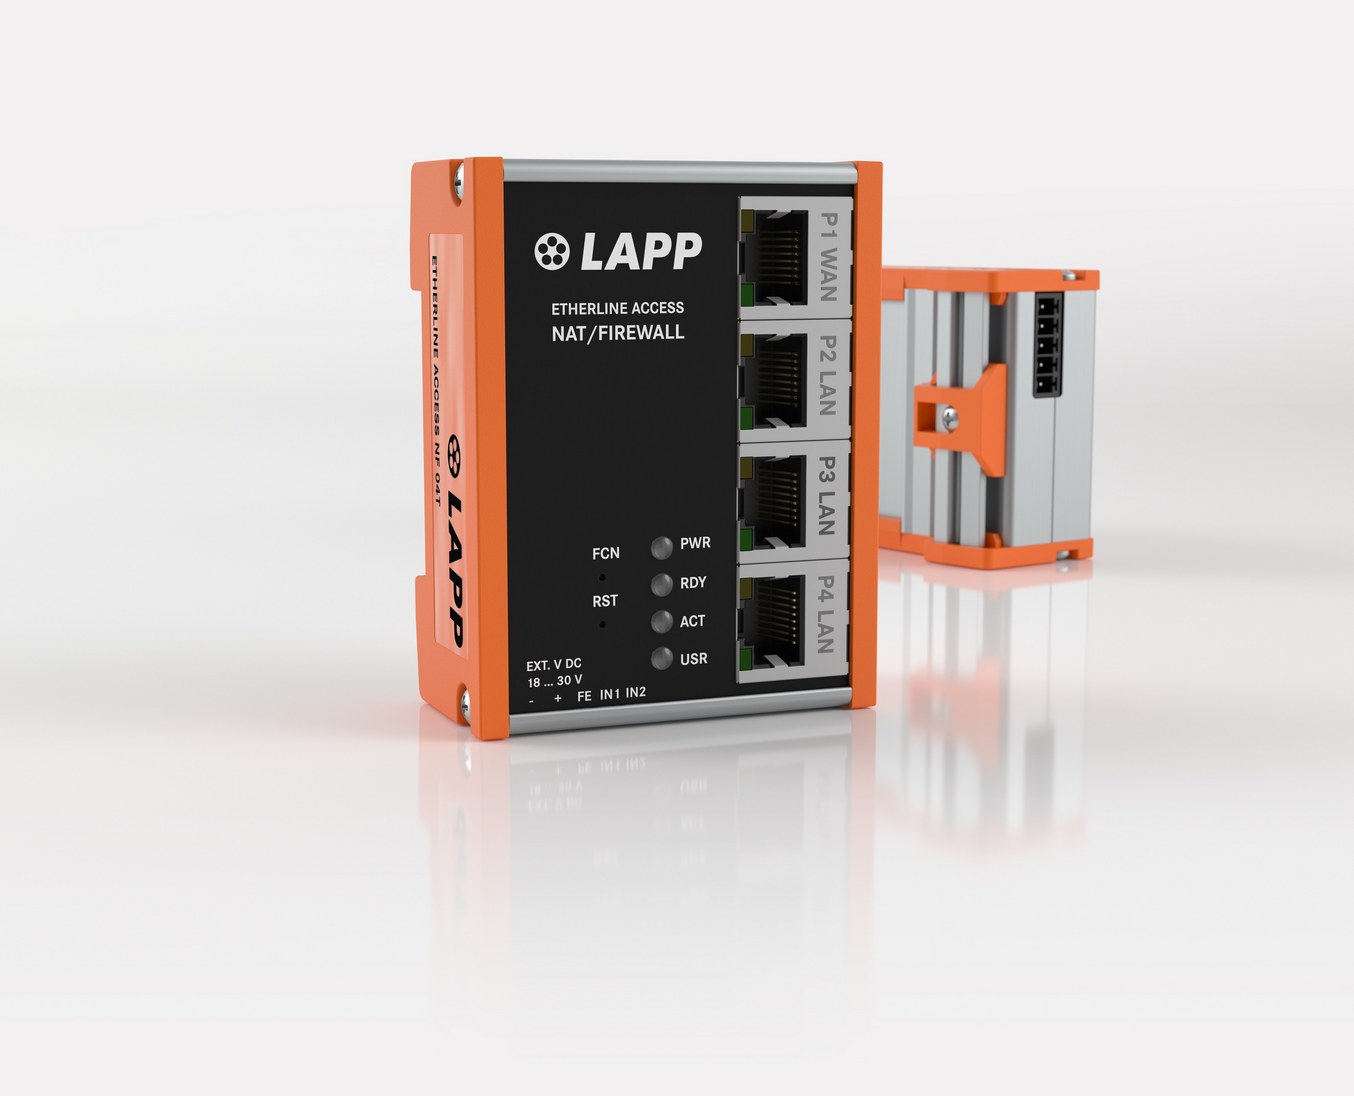 LAPP presents new products and digital solutions at Hannover Messe 2019